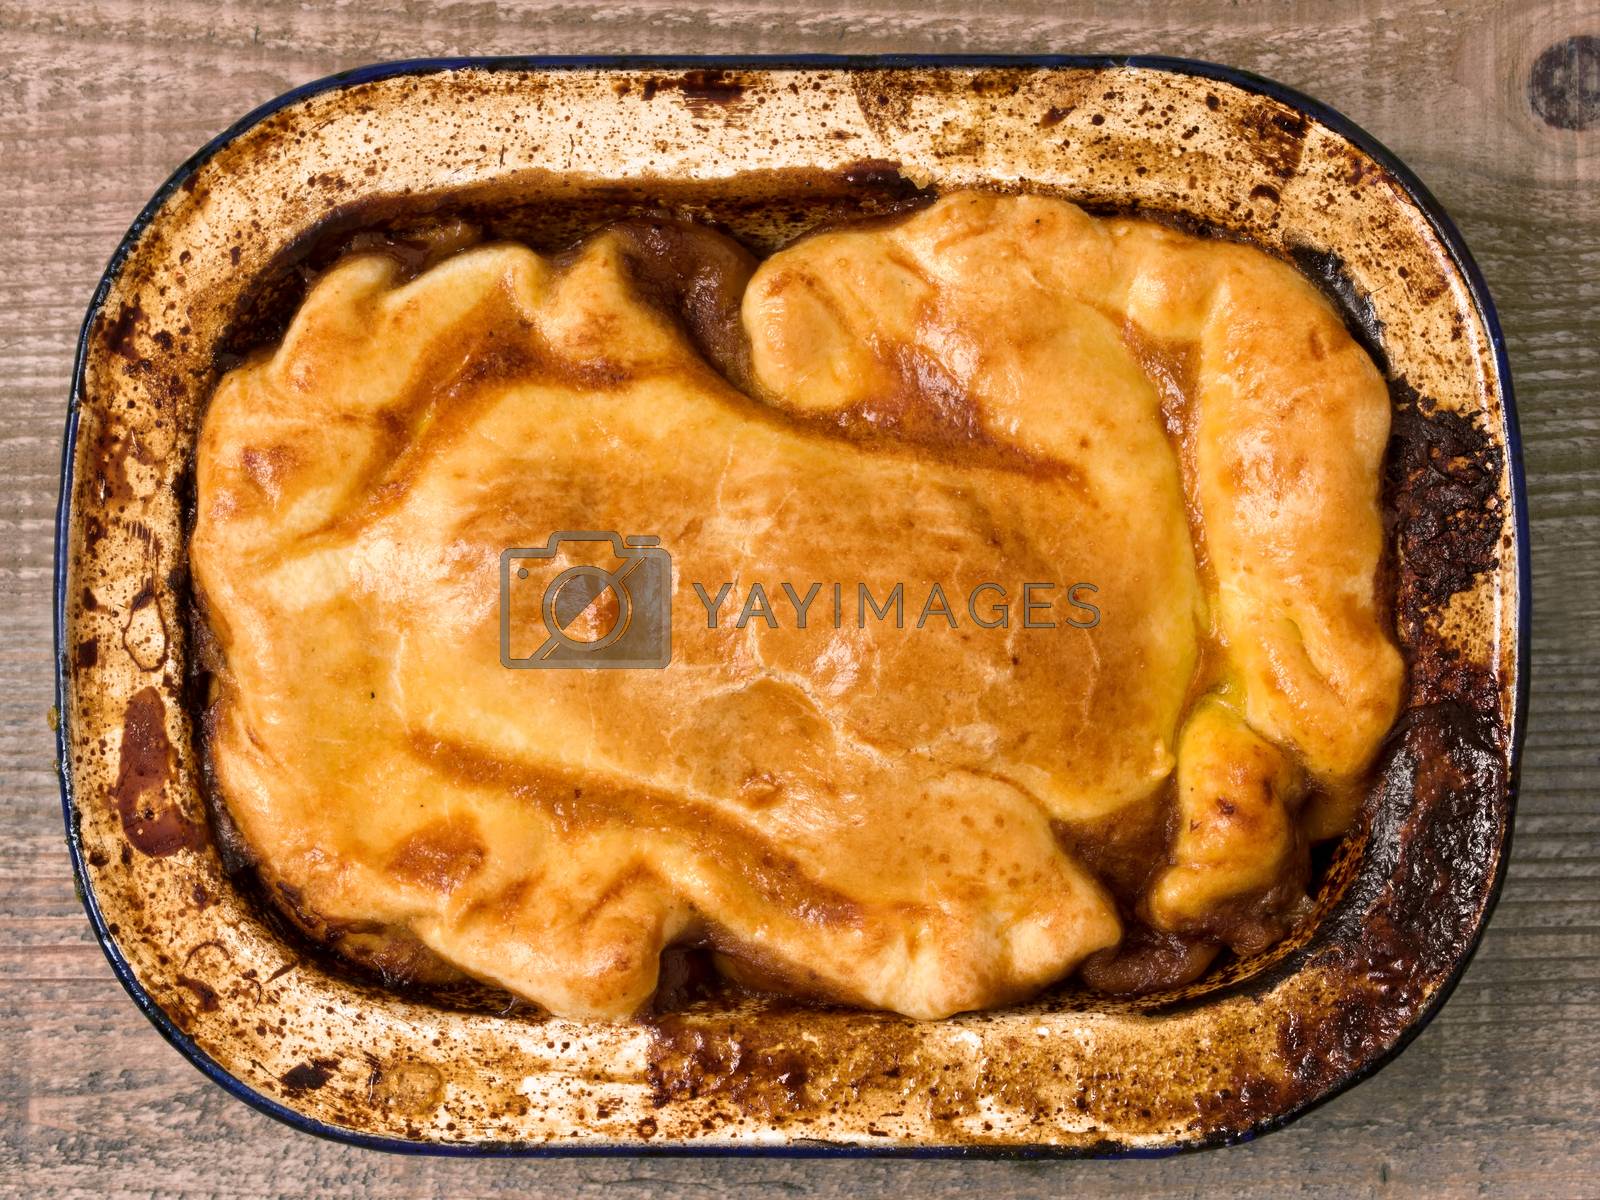 Royalty free image of rustic meat pie by zkruger